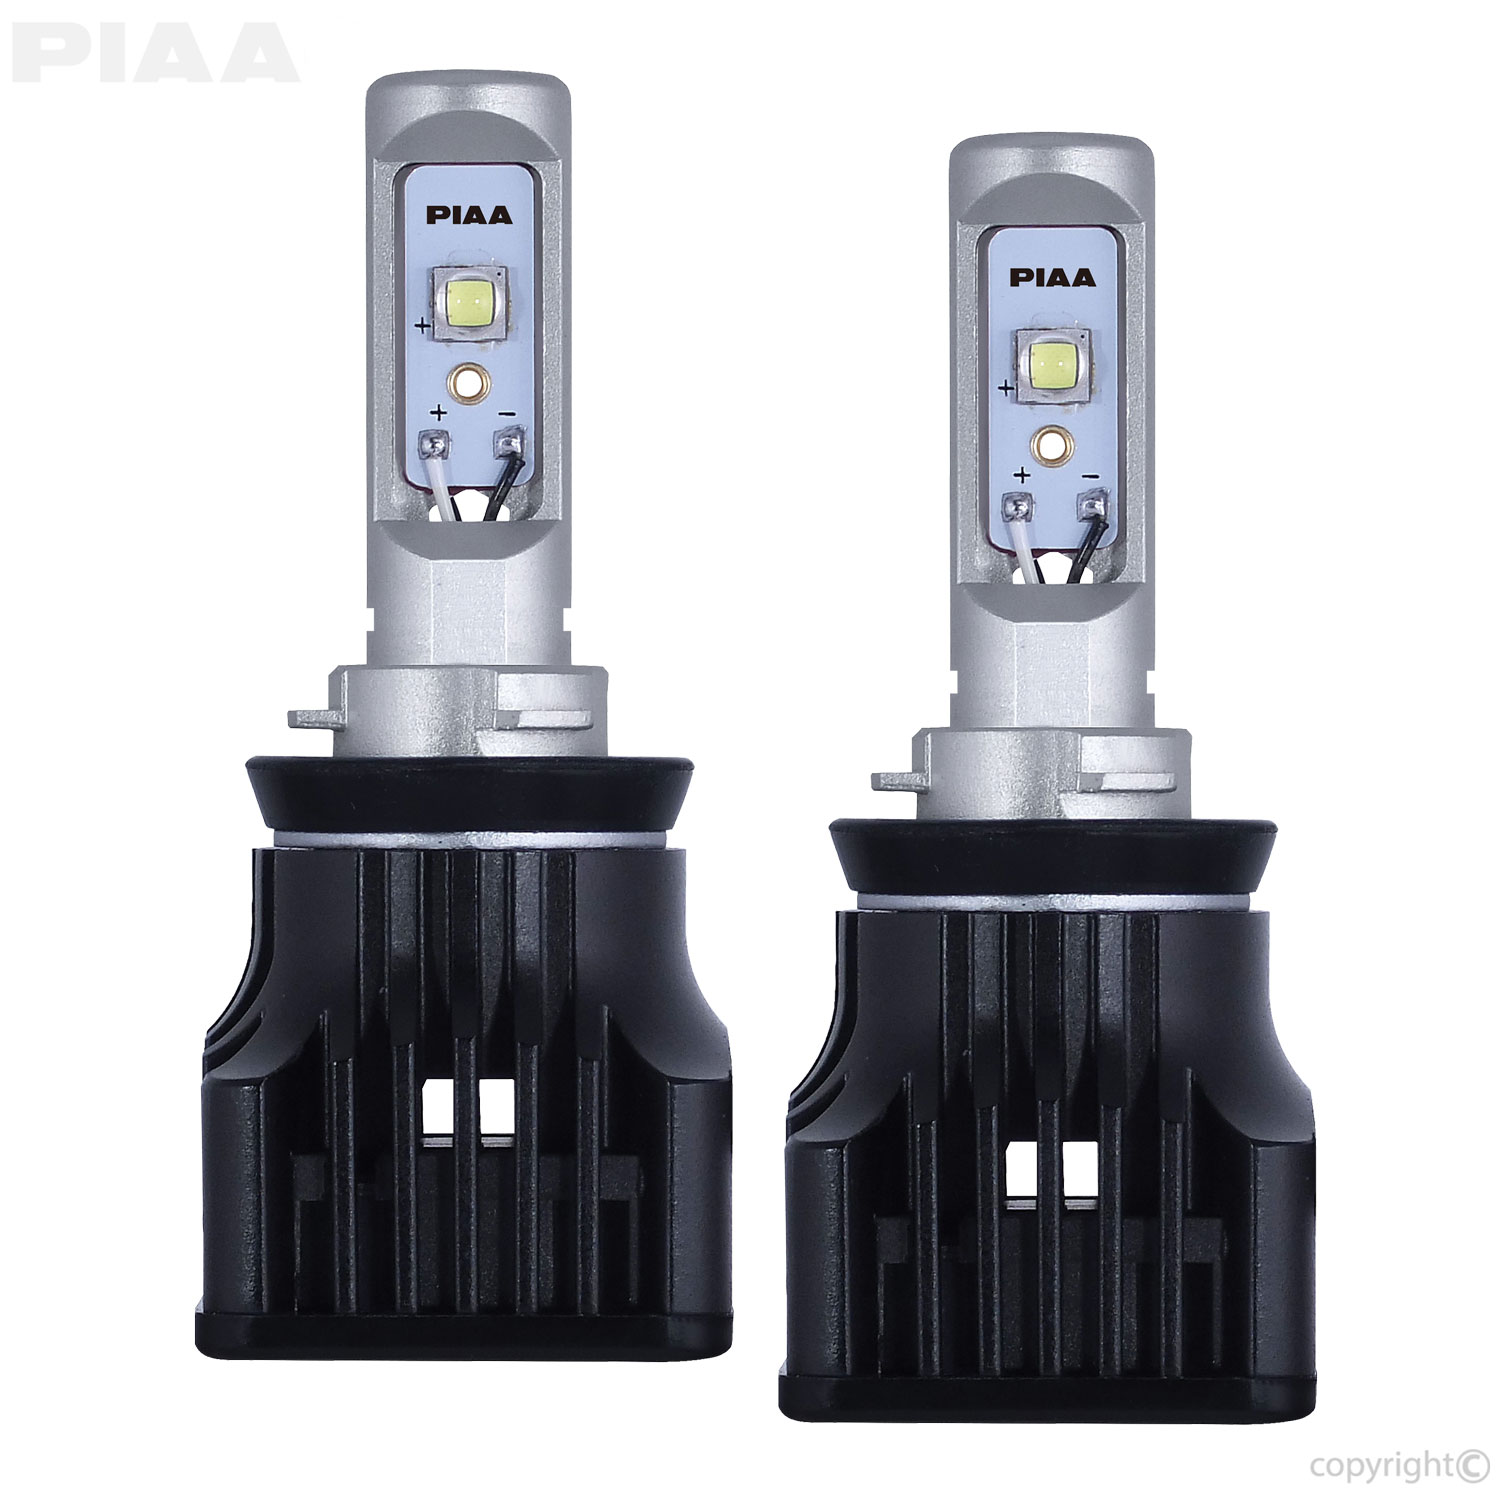 https://www.piaa.com/resize/Shared/product-images/automotive-bulbs/piaa-17201-9006-led-white-dual-hr.jpg?bw=1000&w=1000&bh=1000&h=1000